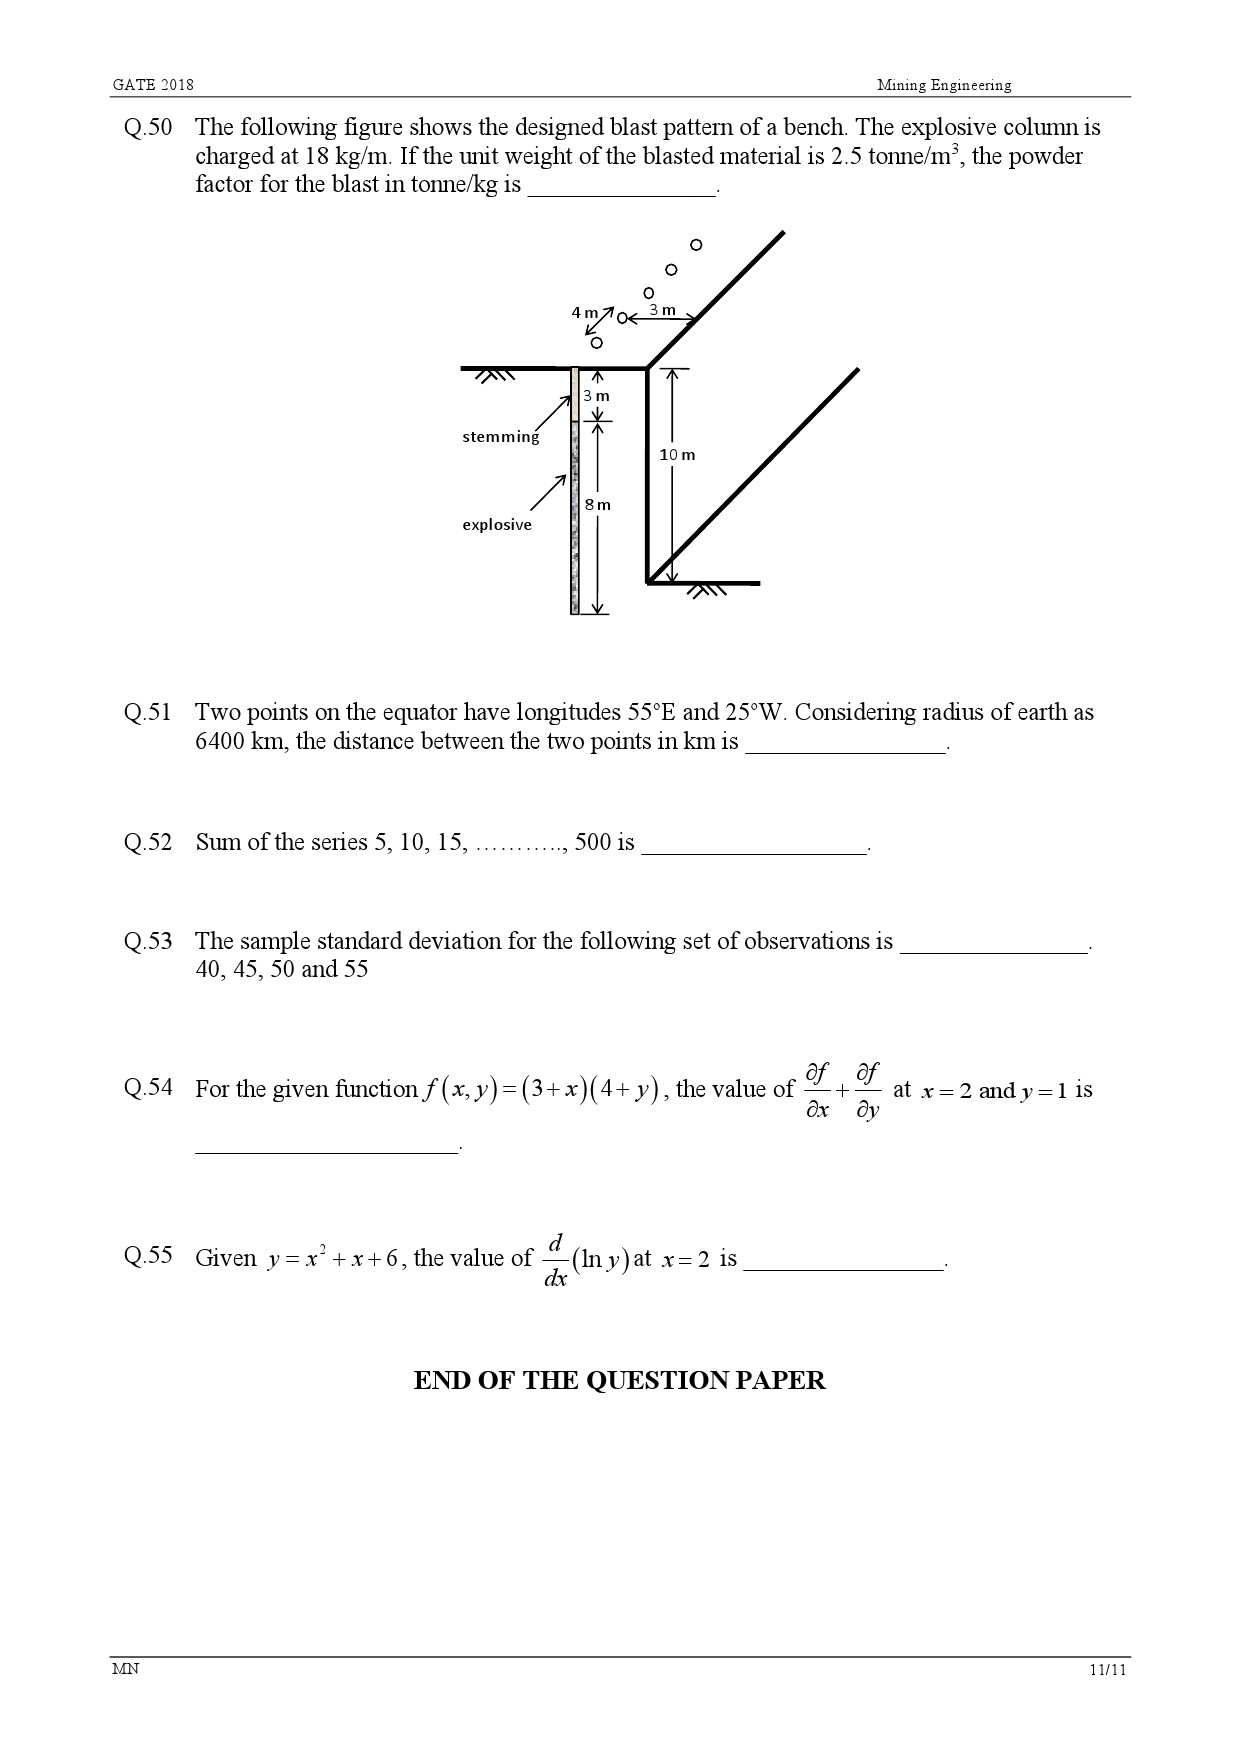 GATE Exam Question Paper 2018 Mining Engineering 14